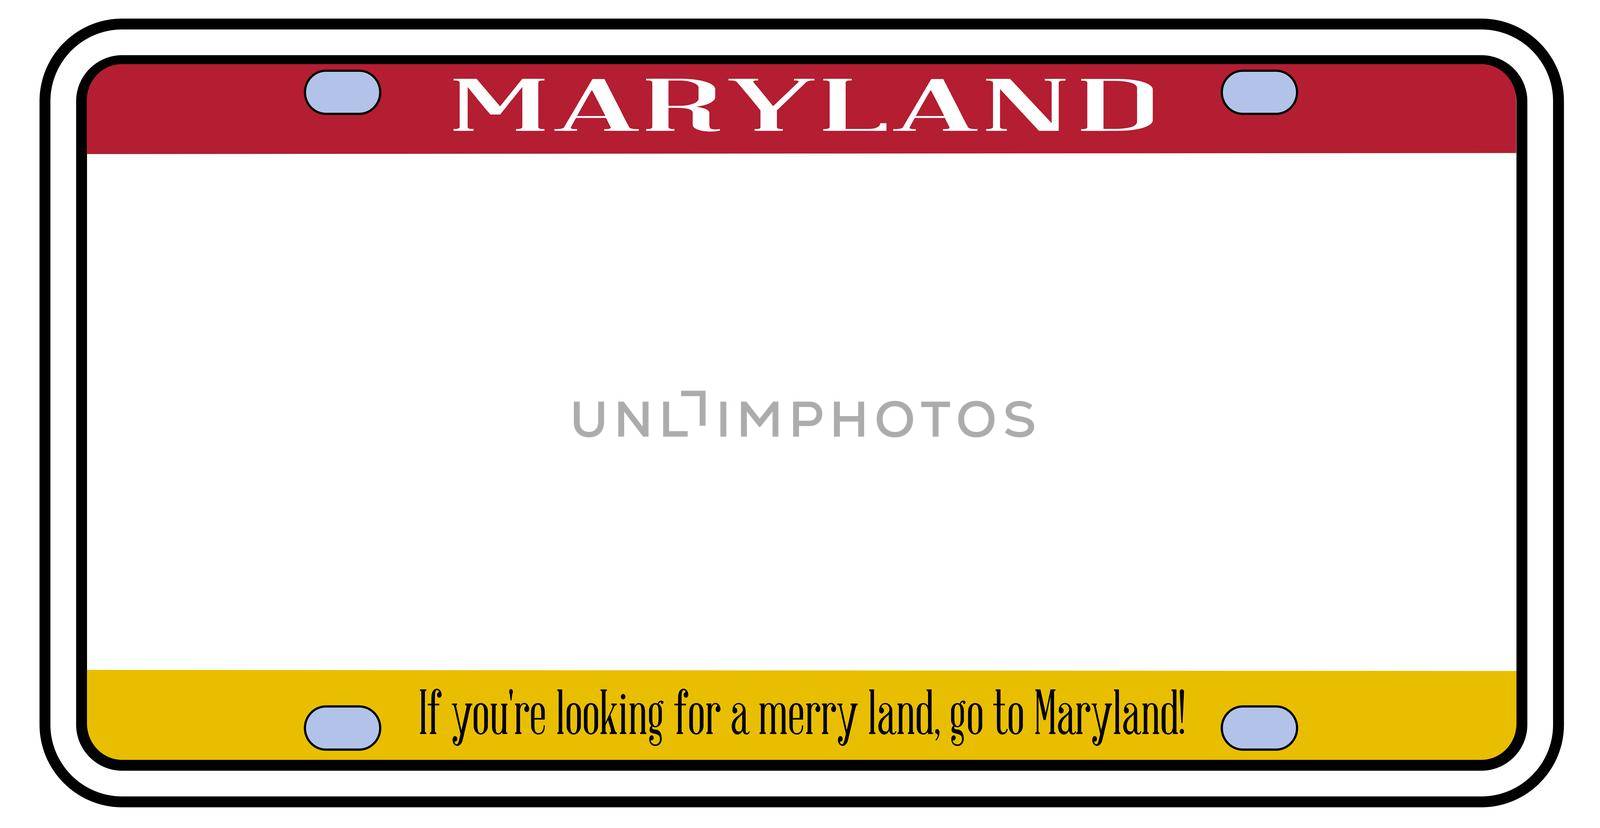 Maryland state license plate in the colors of the state flag over a white background